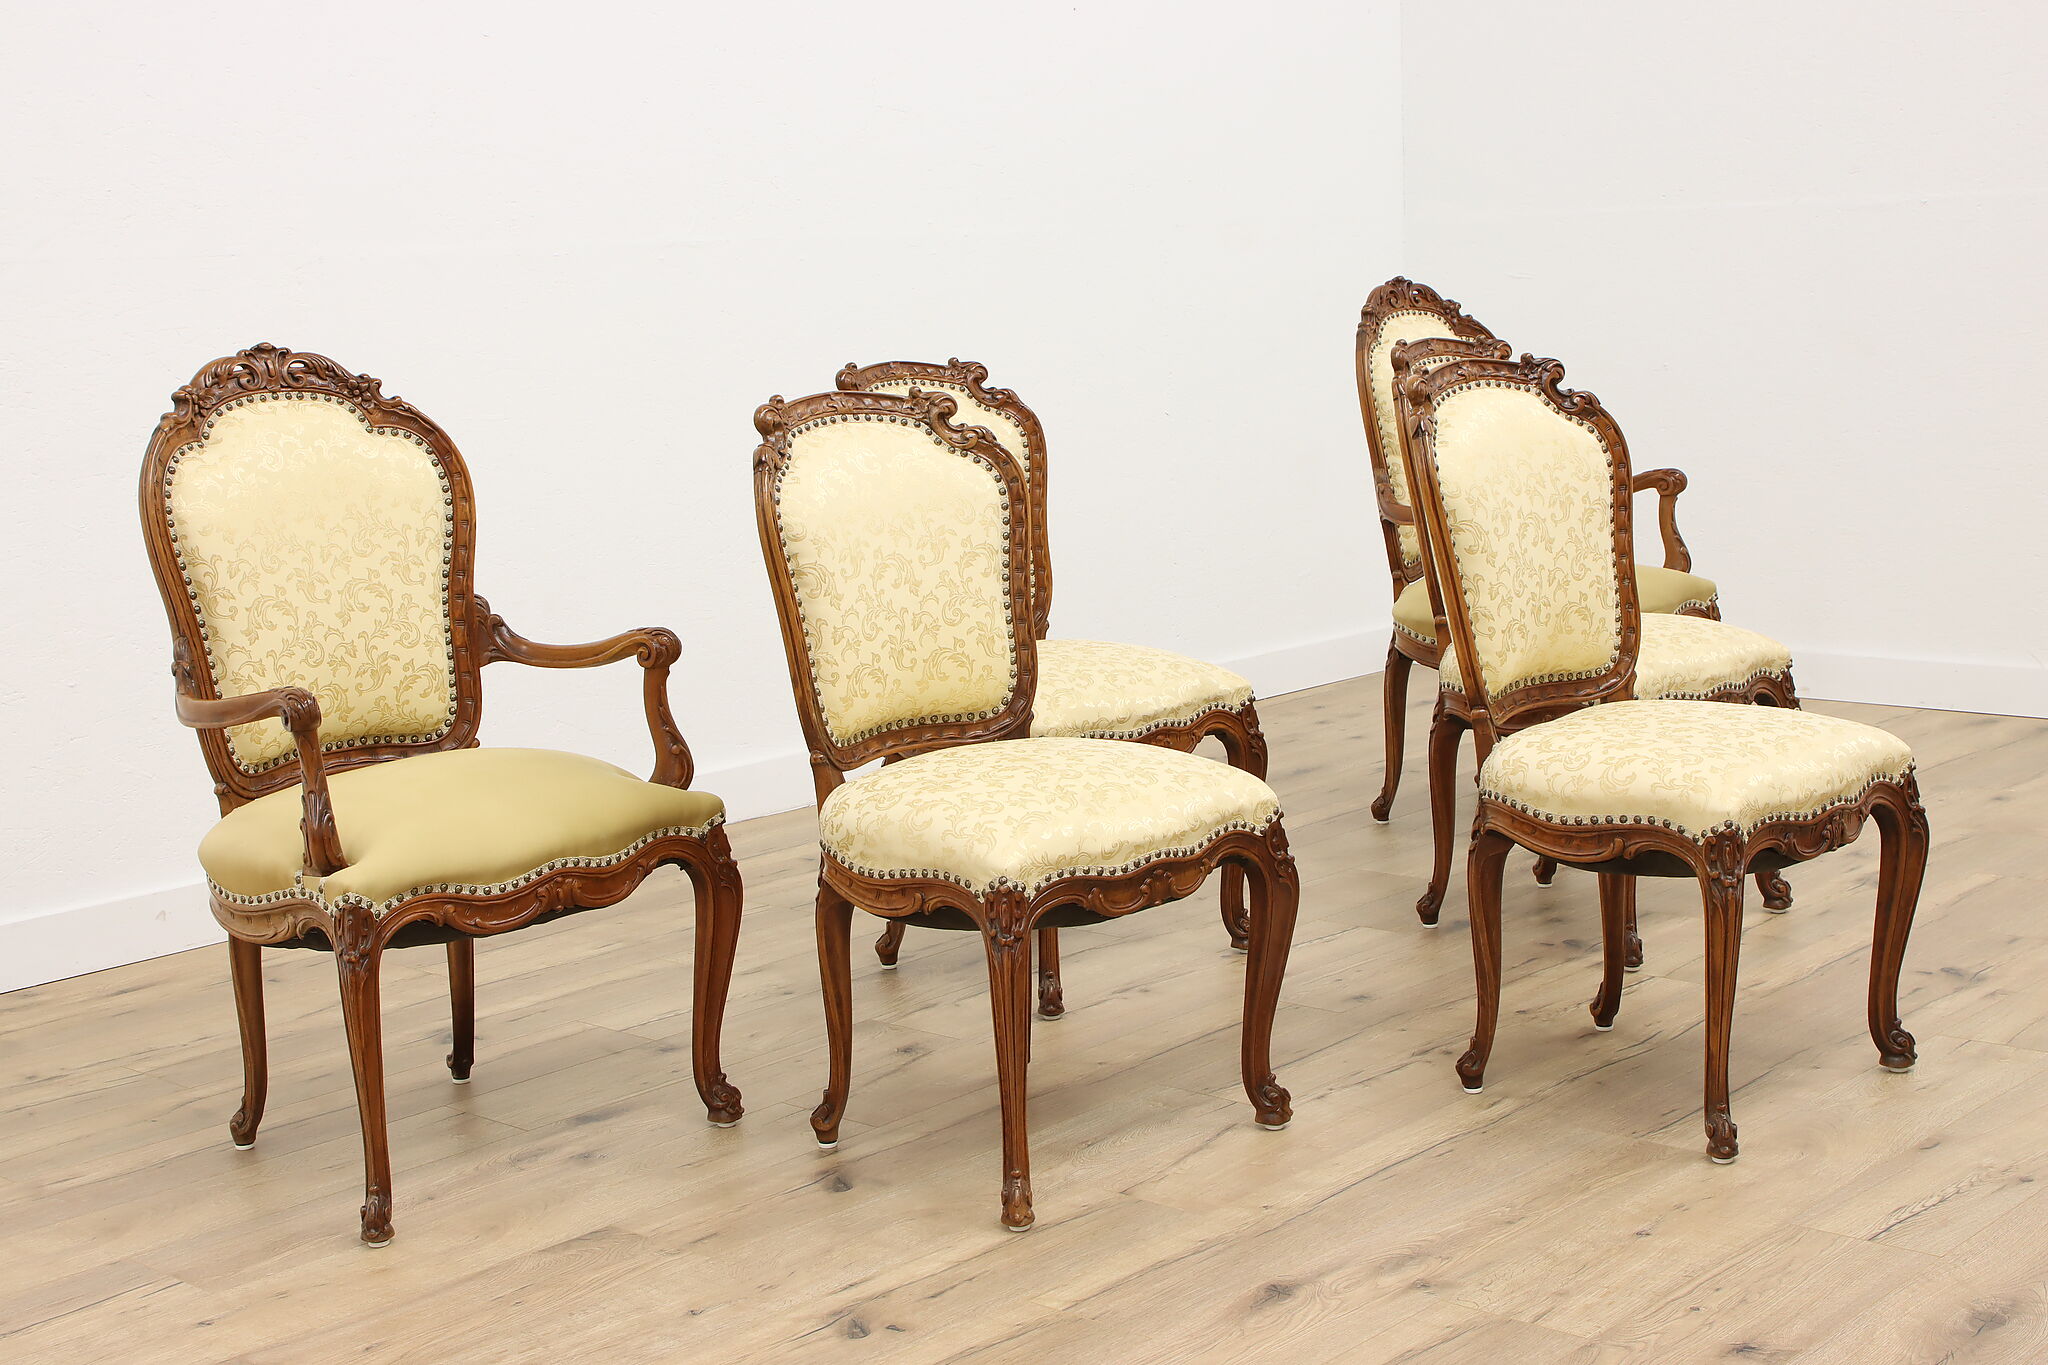 French Louis XVI Dining Room Chairs, Faux Leather Upholstery - Set